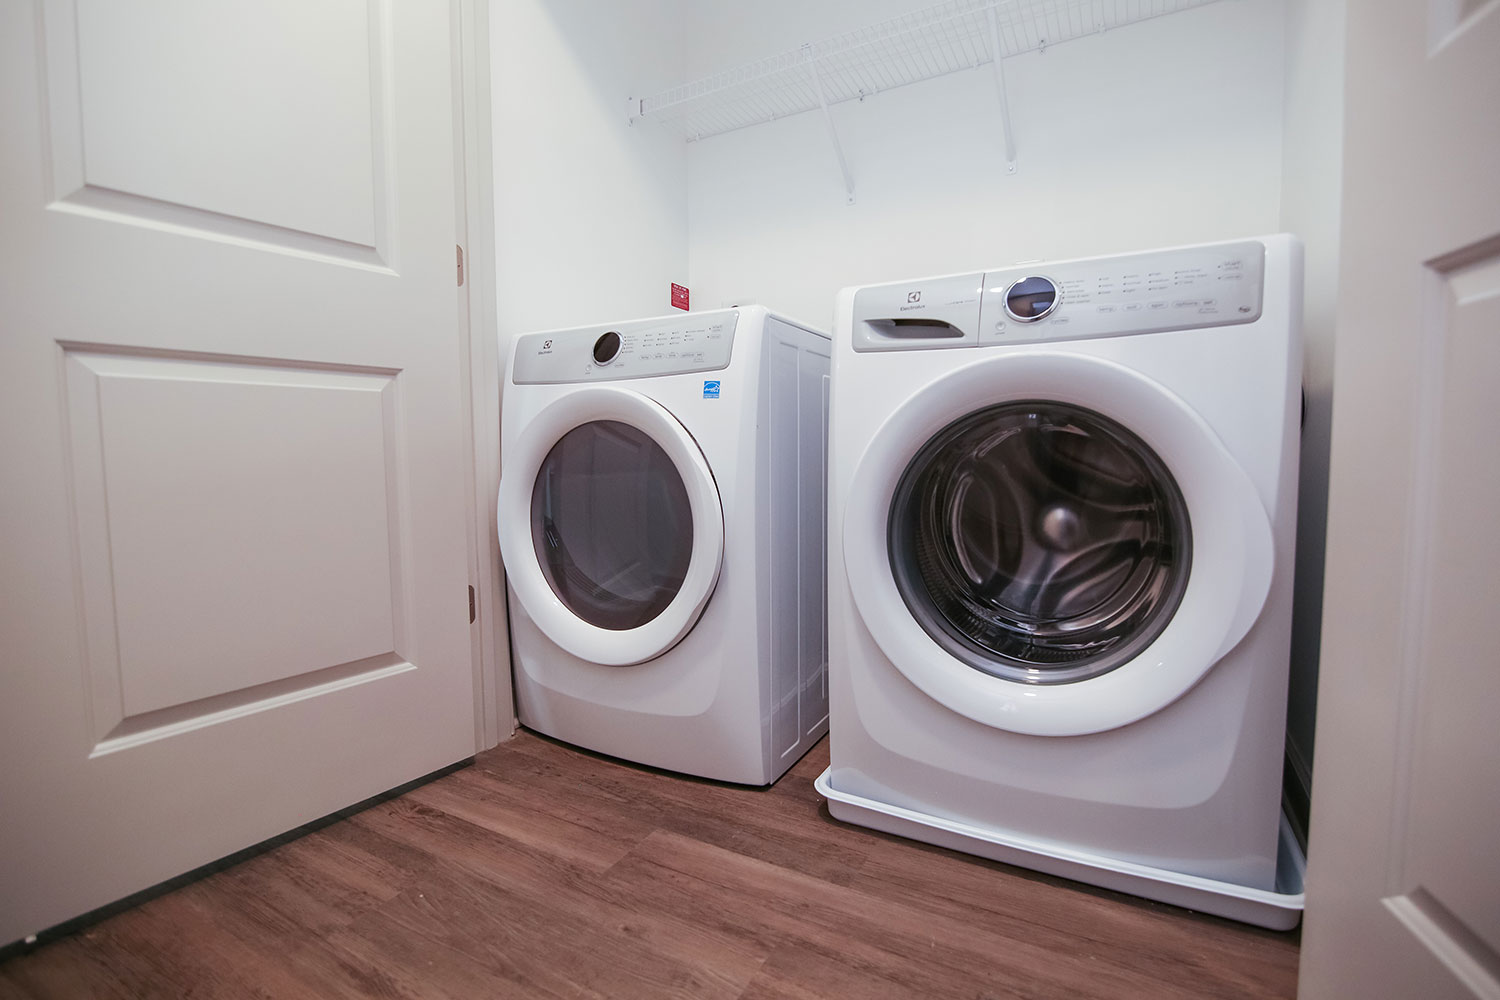 Townsquare laundry room